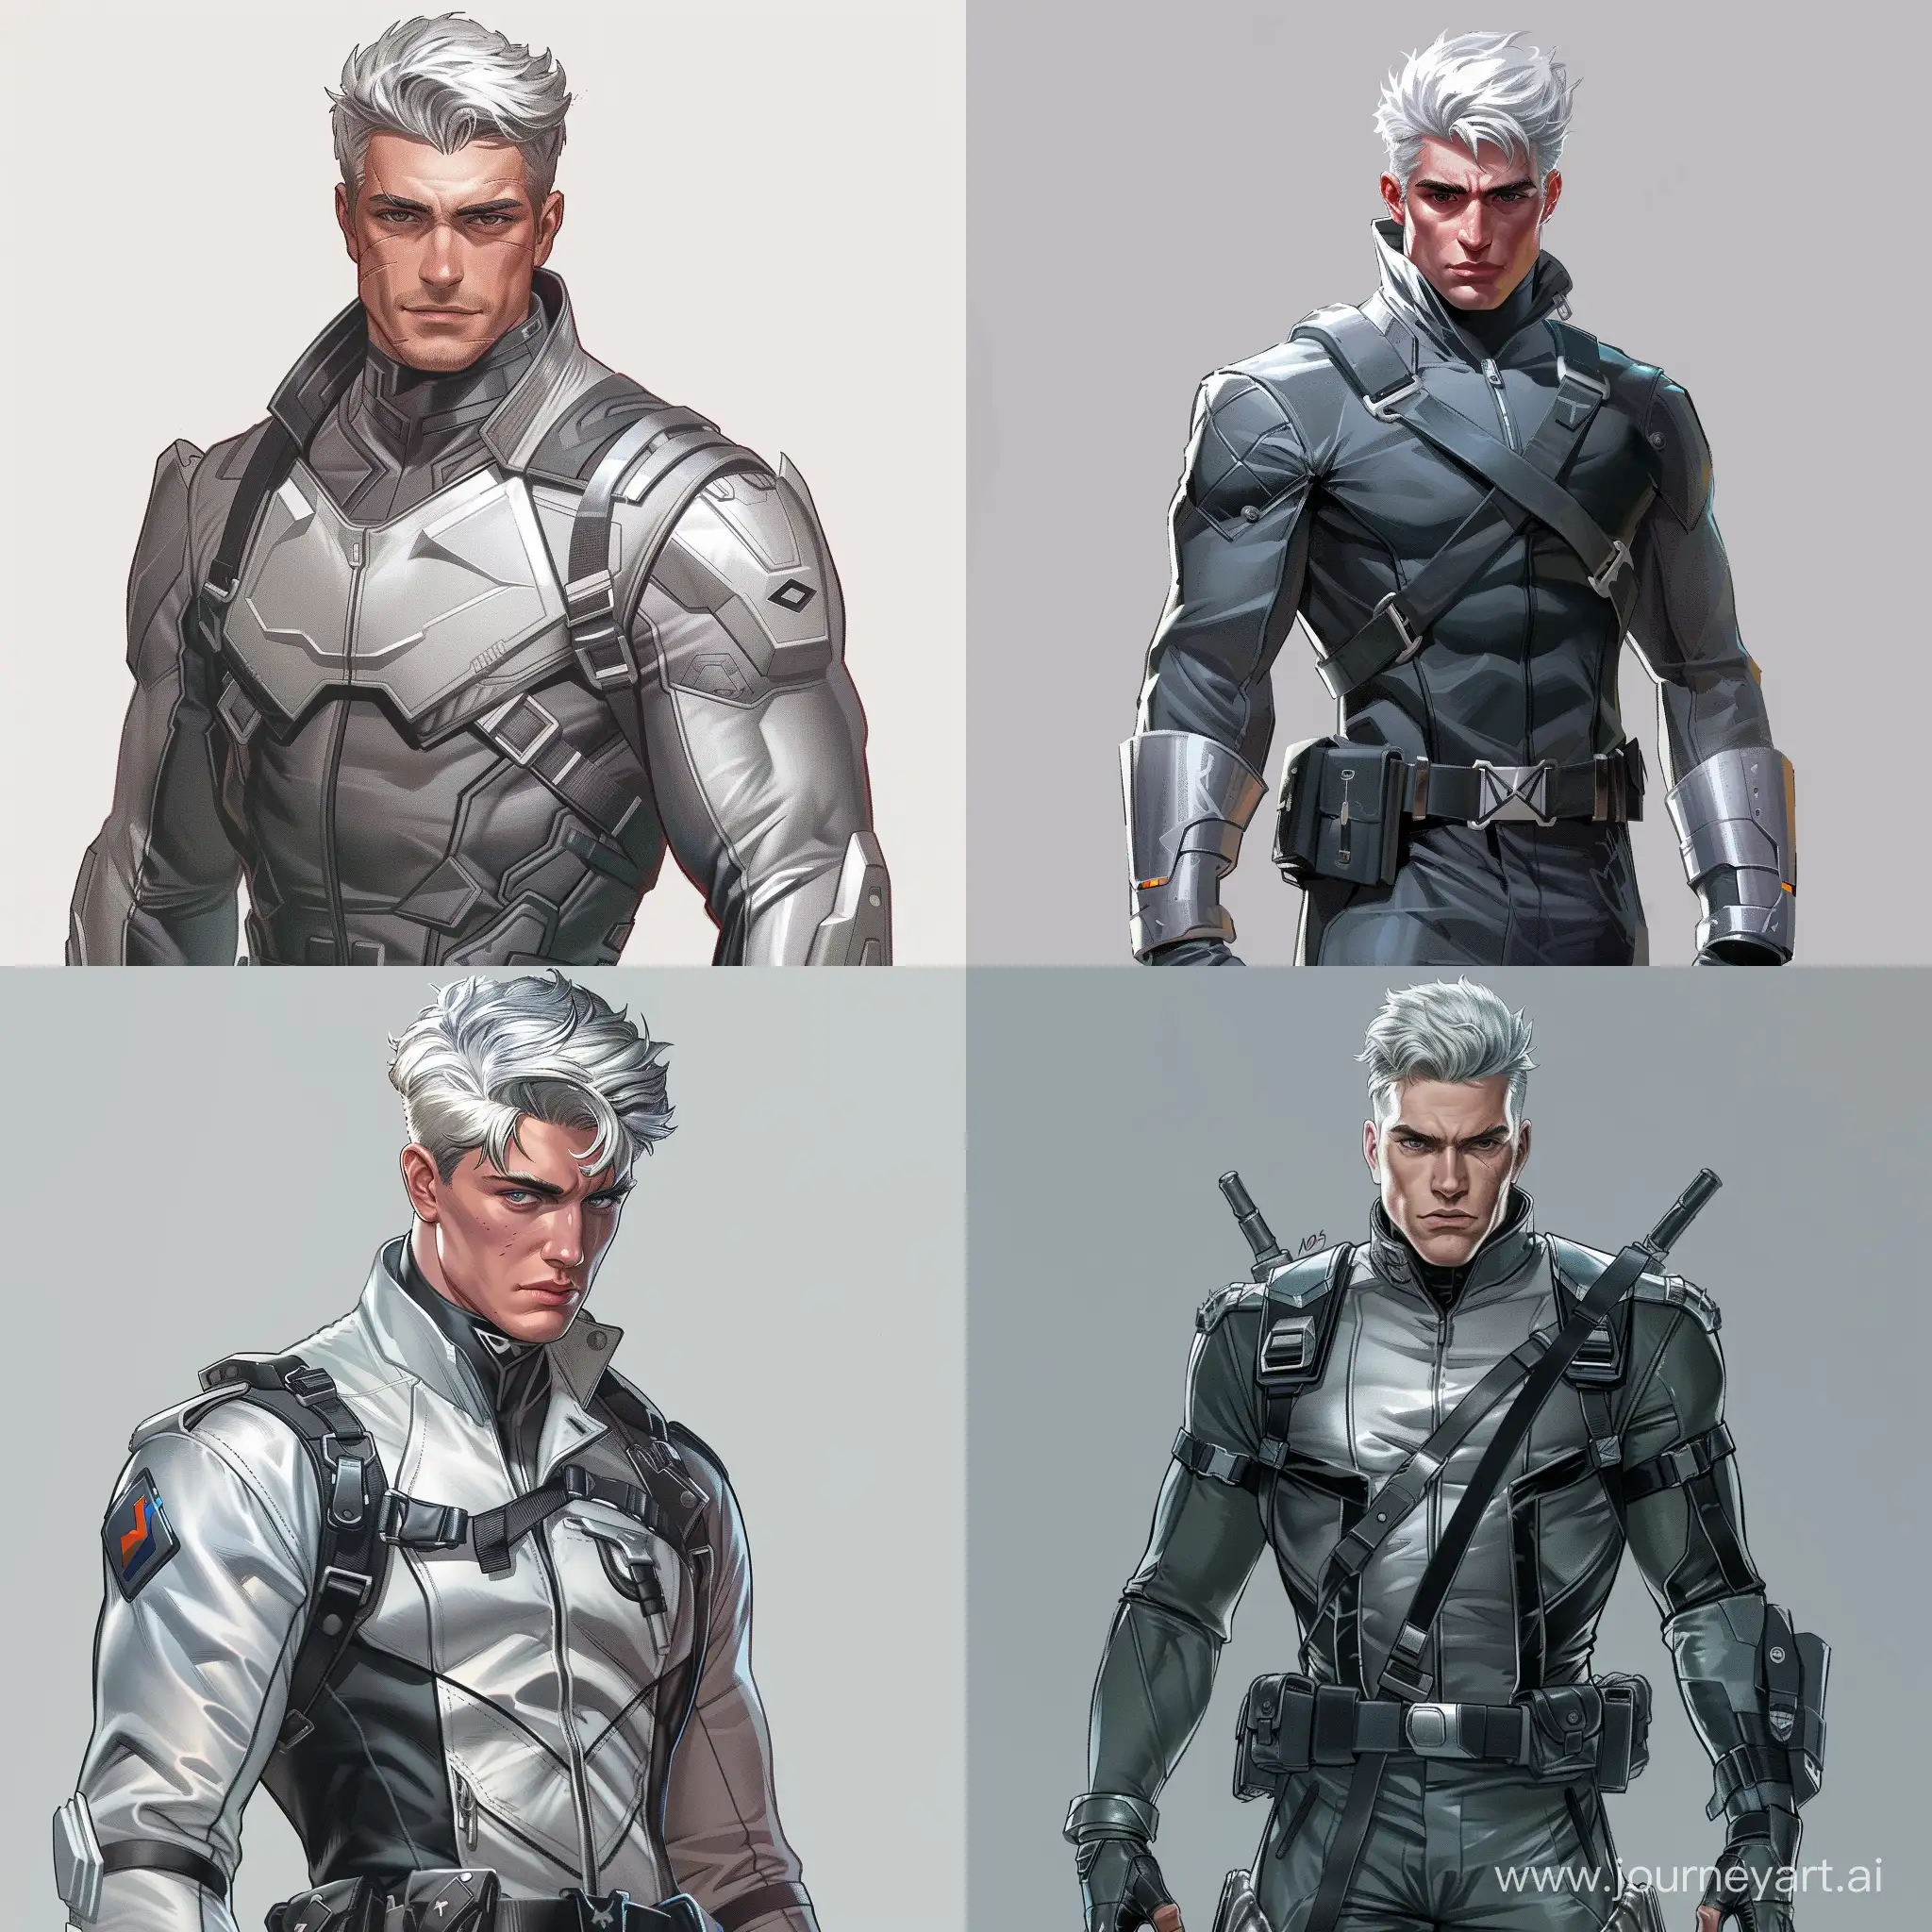 Marvels-Handsome-Male-Spy-Variant-Silver-Sable-with-Silver-Hair